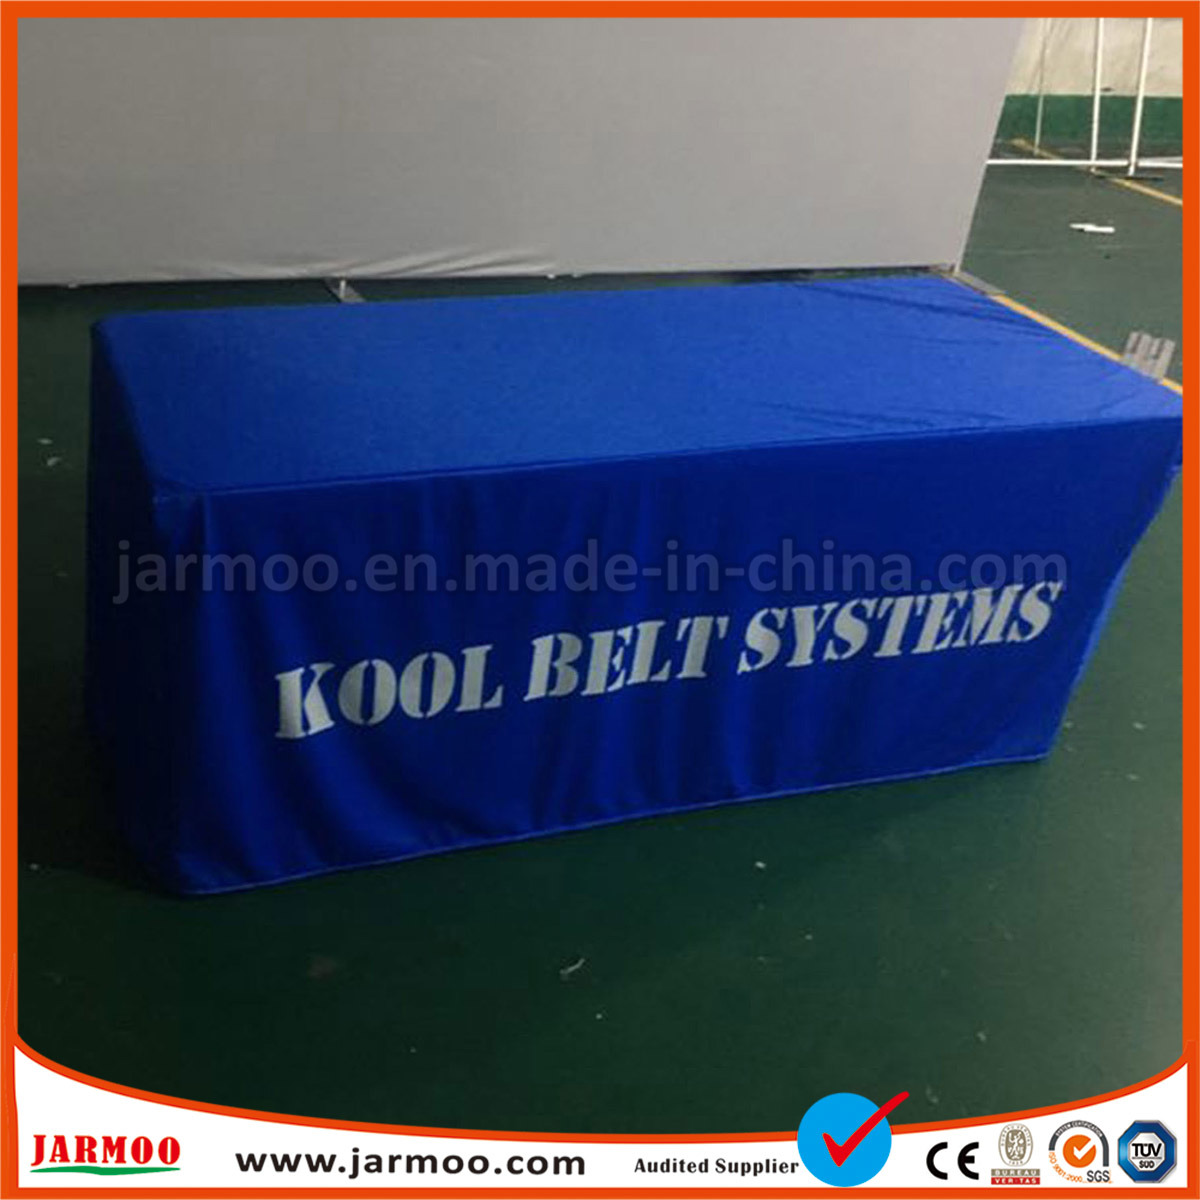 Customized Printing Table Cover for Promotion and Advertising